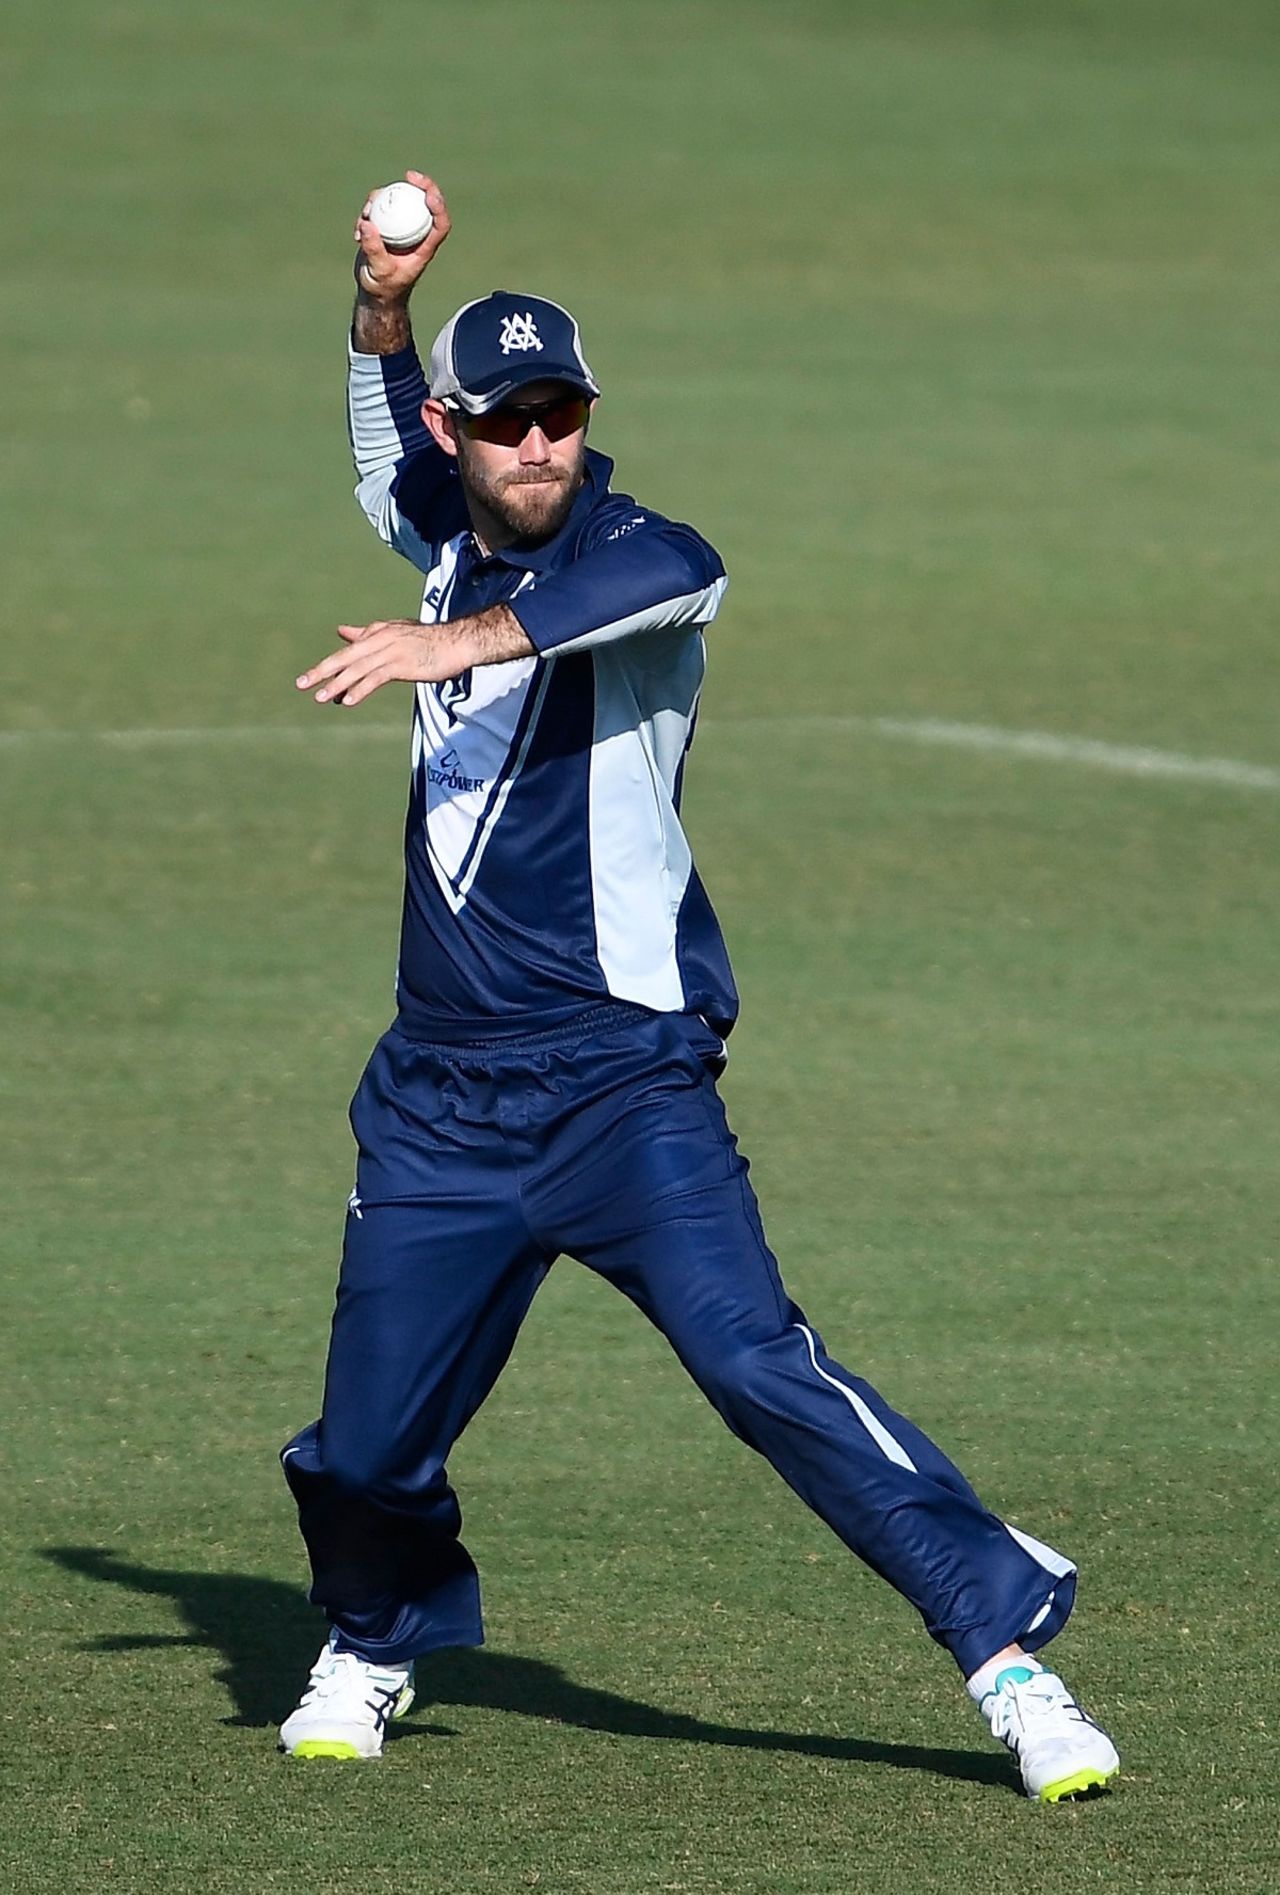 Glenn Maxwell in action at the JLT Cup, Queensland v Victoria, JLT Cup 2018, Townsville,, September 16, 2018